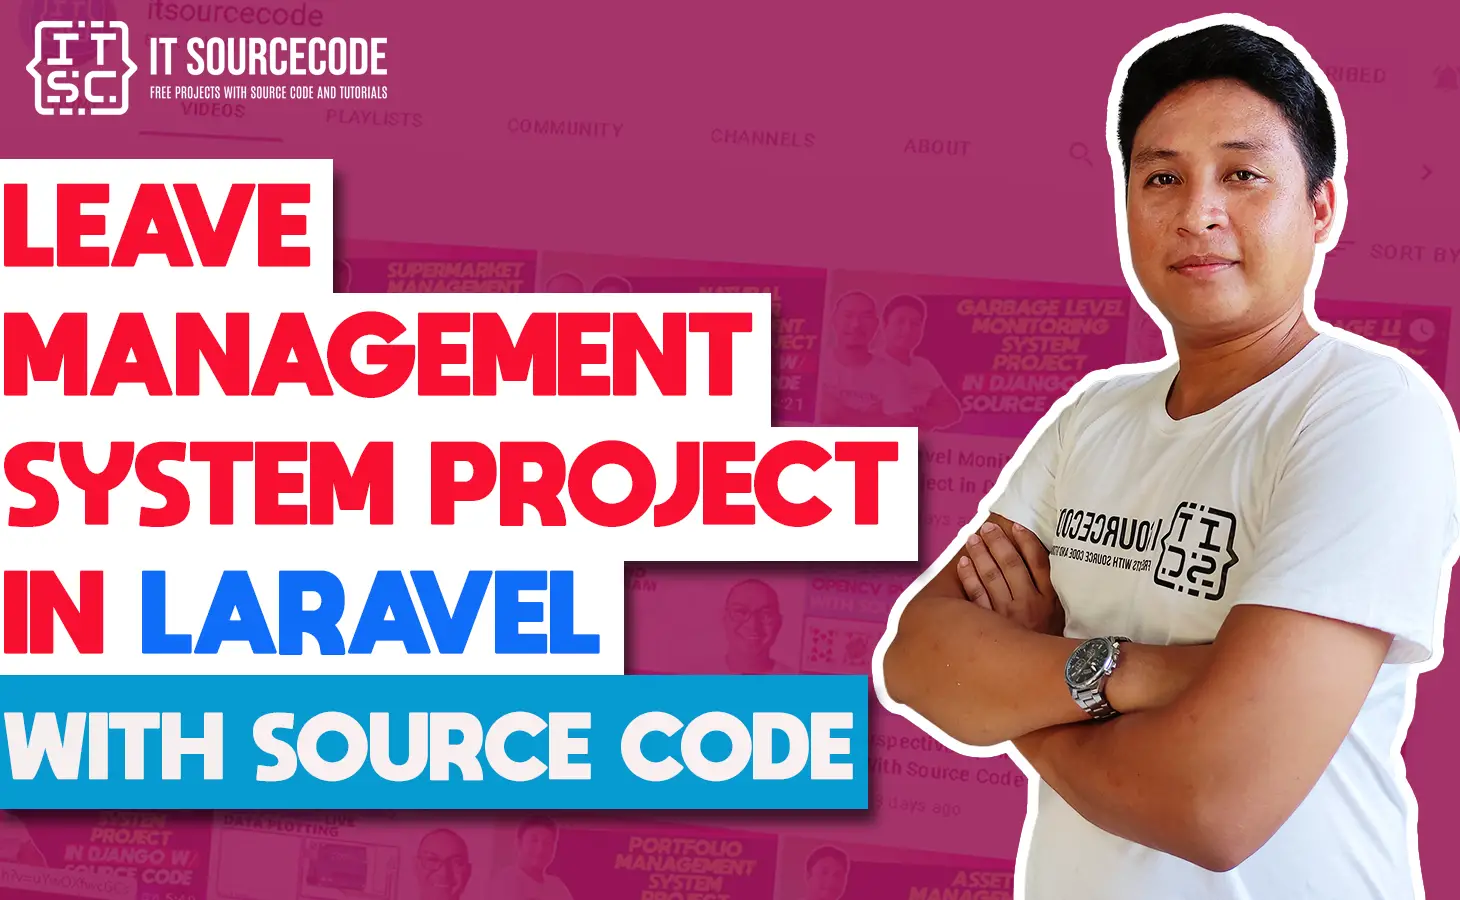 Leave Management System Project in Laravel with Source Code